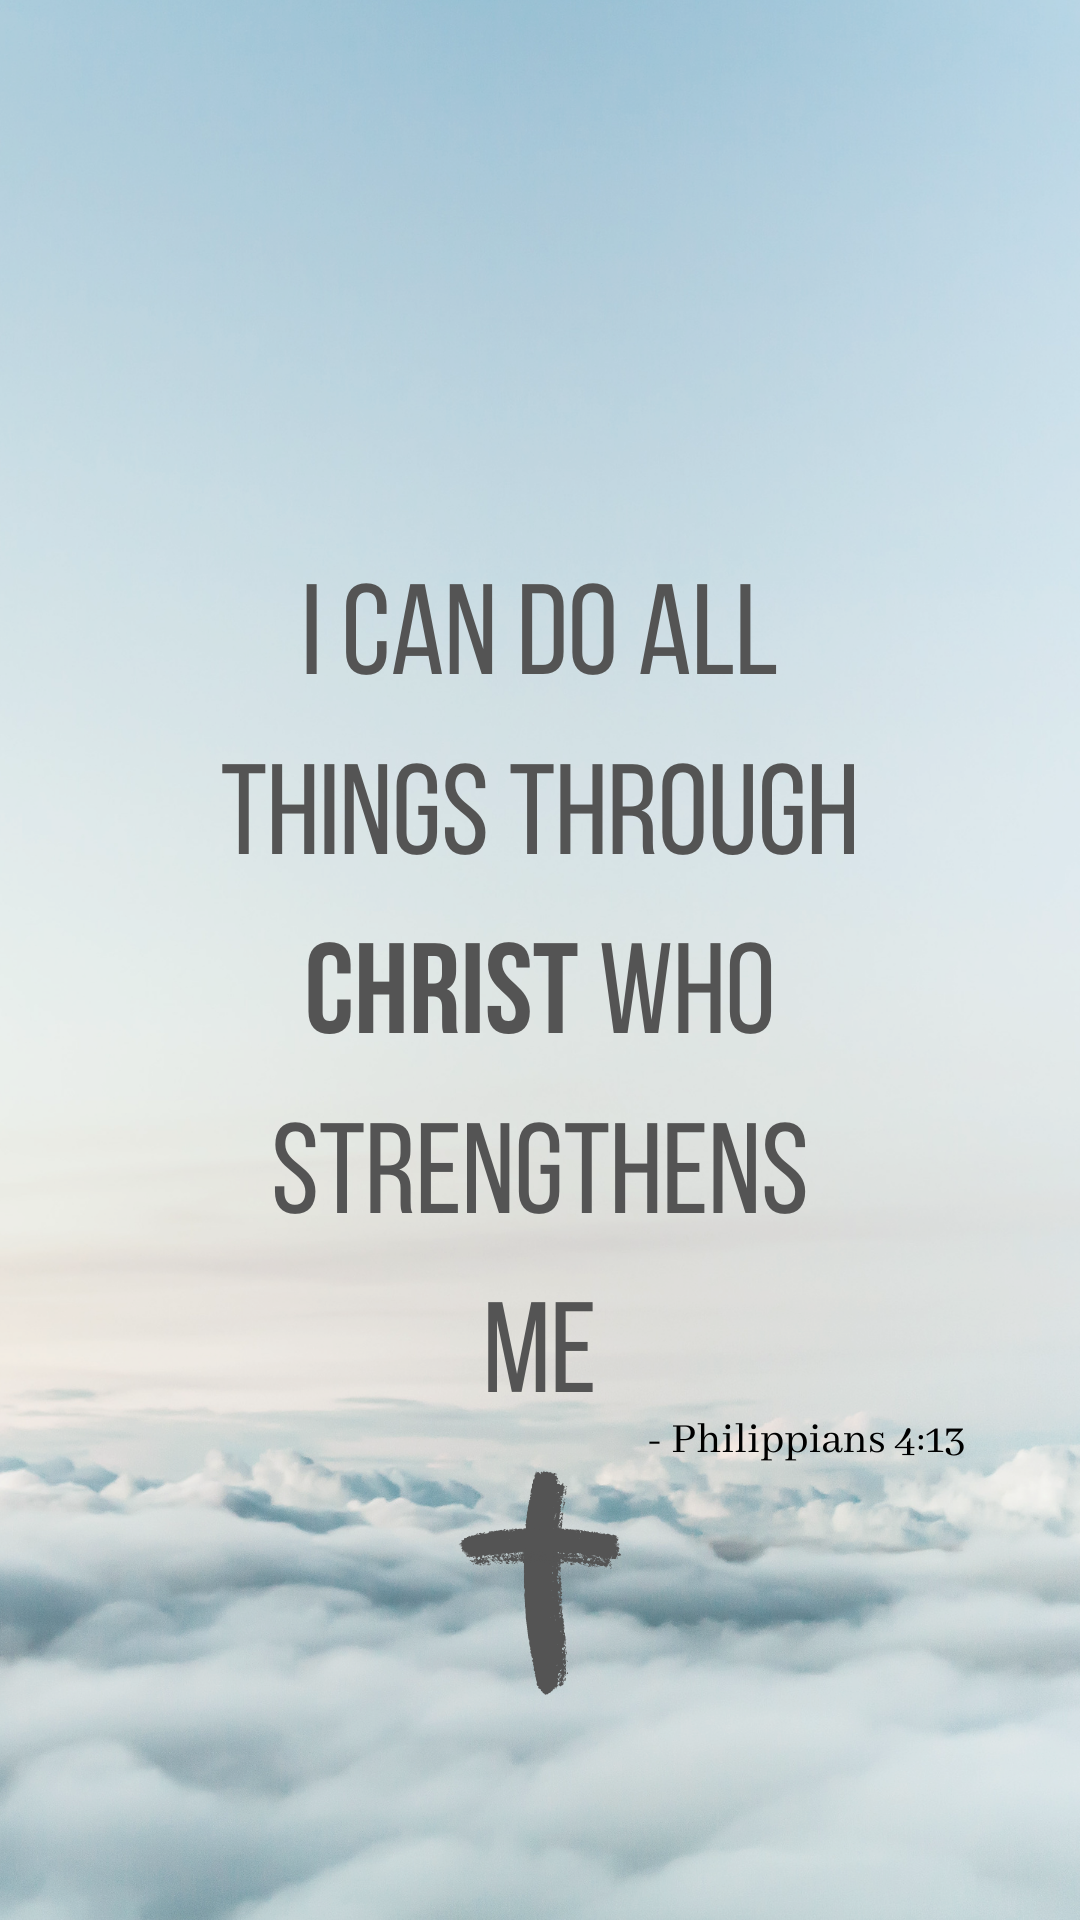 Phone Wallpaper can do all things through Christ who strengthens me